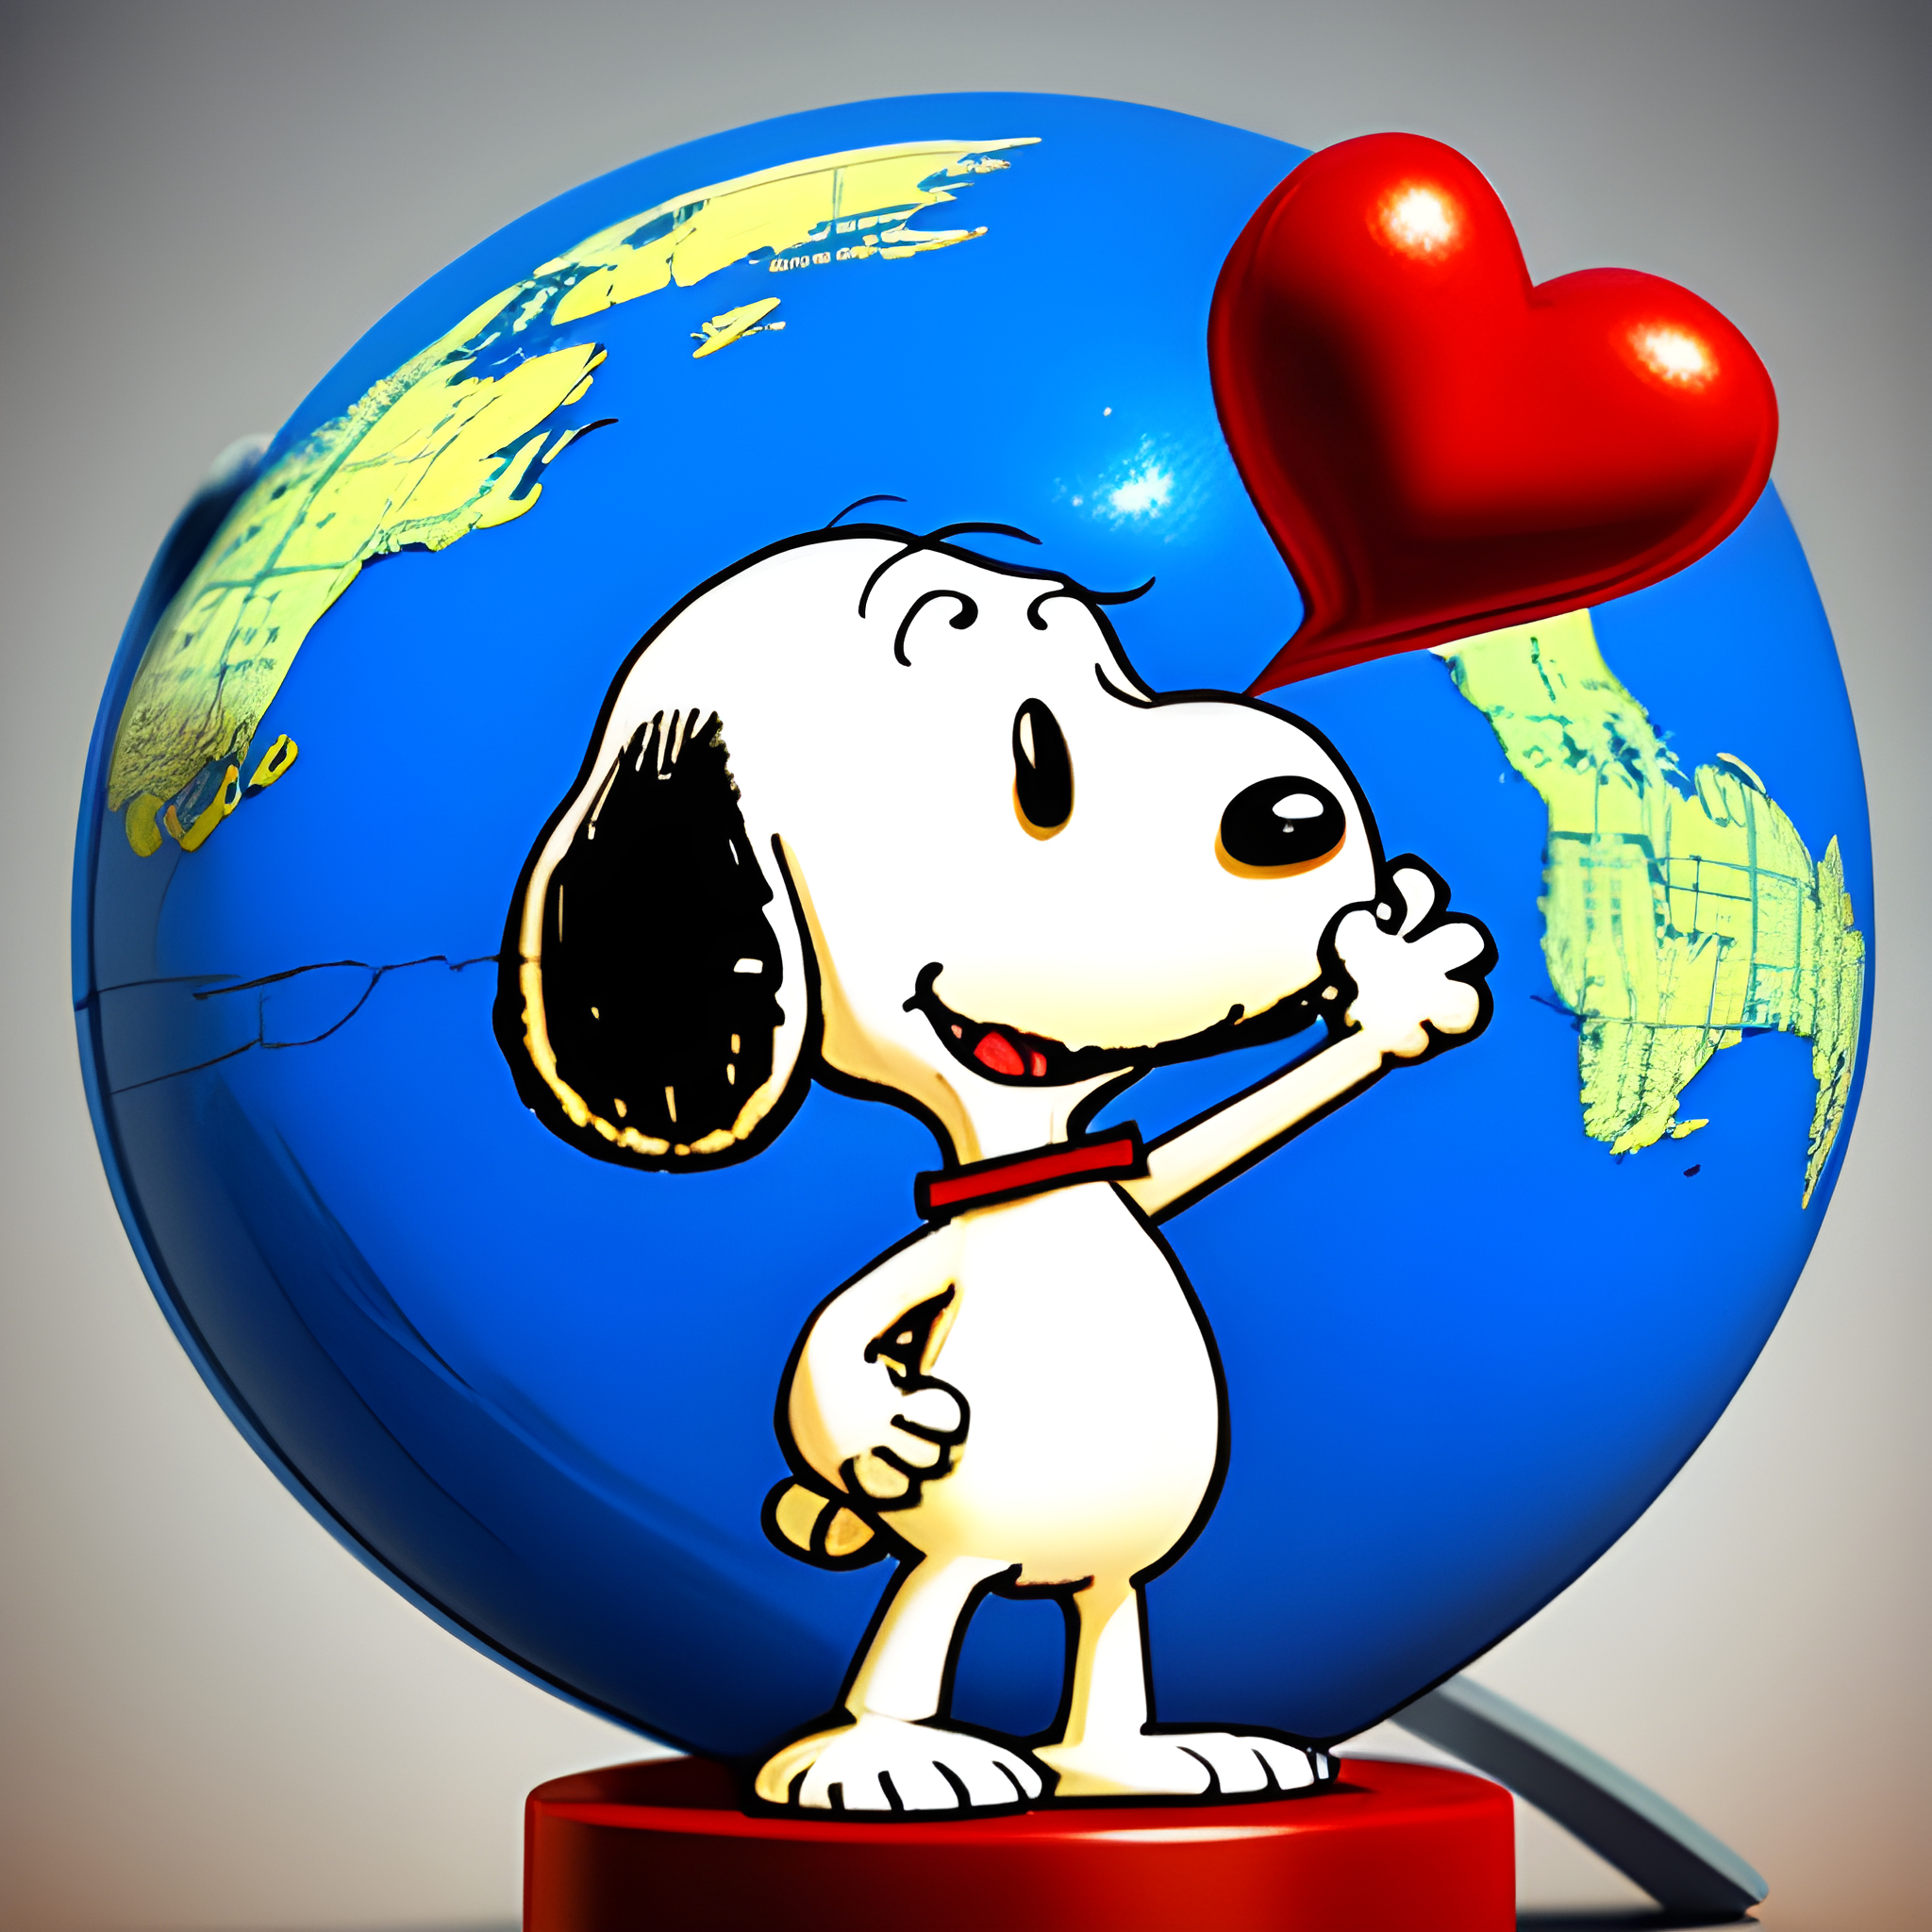 LOVESNOOPY Burns 85% of Tokens While Crypto Experts Amass New Eco-Friendly Cryptocurrency In Anticipation of Exchange Listing